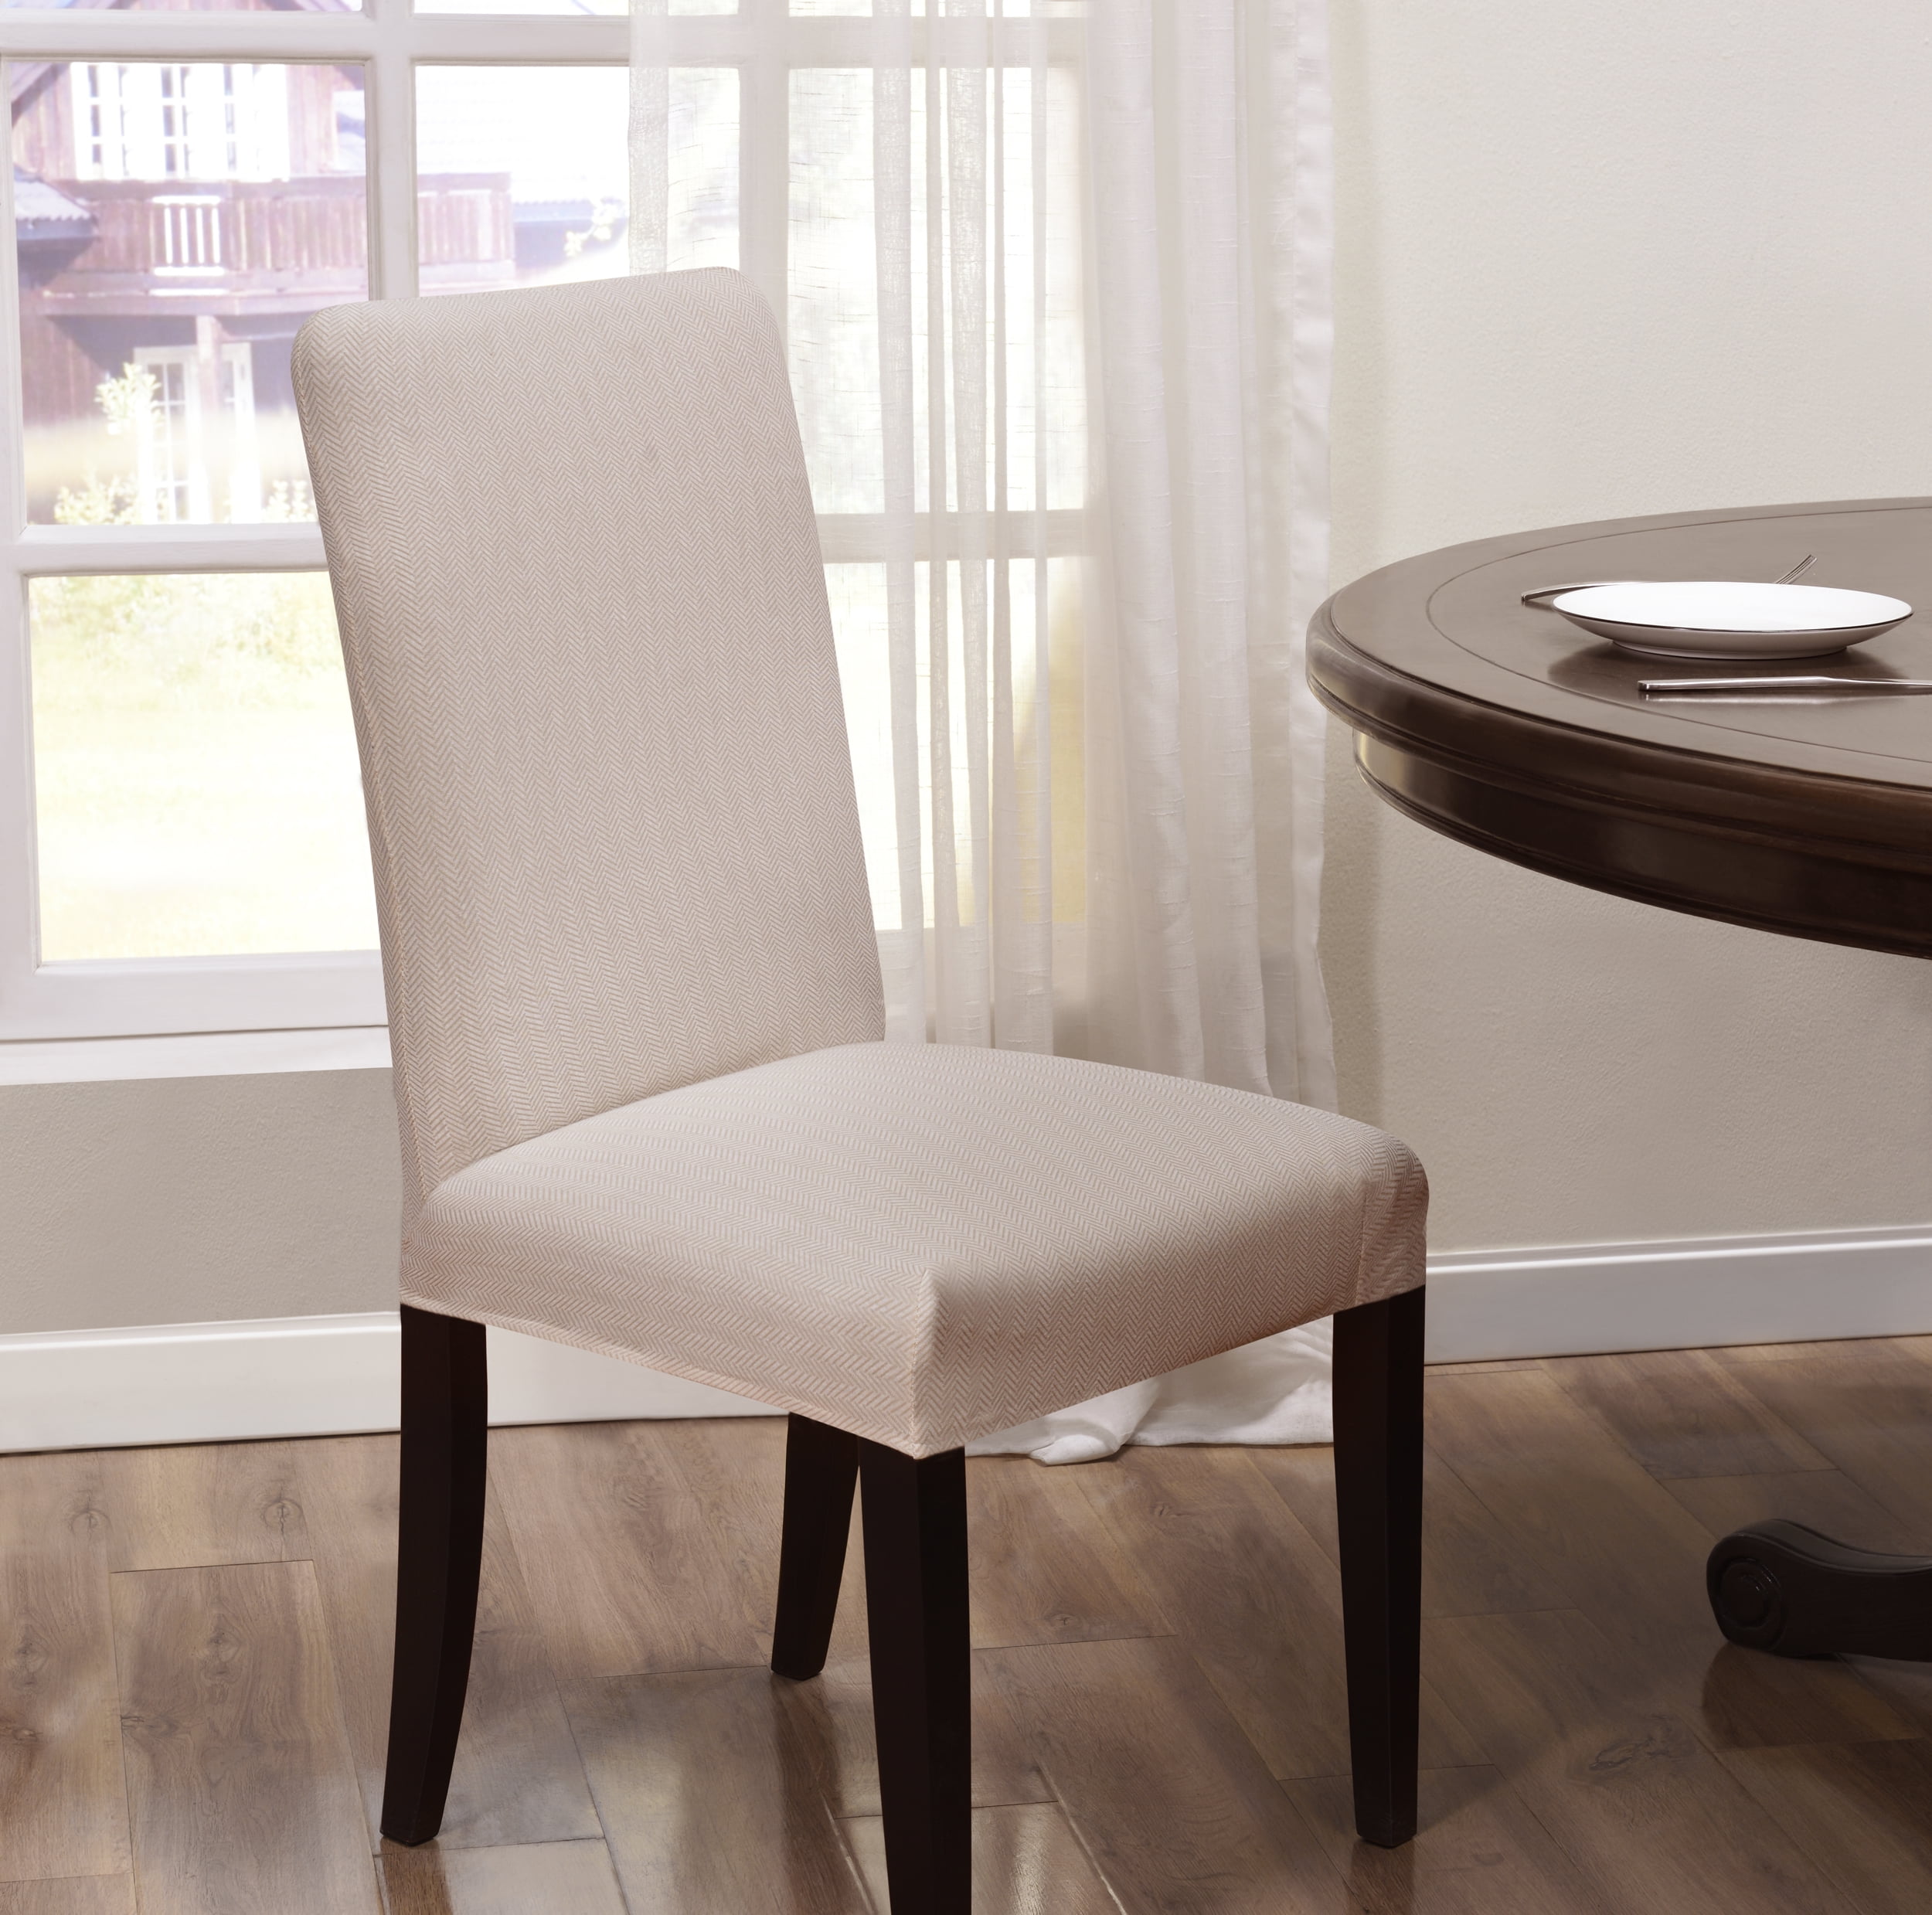 Unique Walmart Dining Room Chairs for Large Space